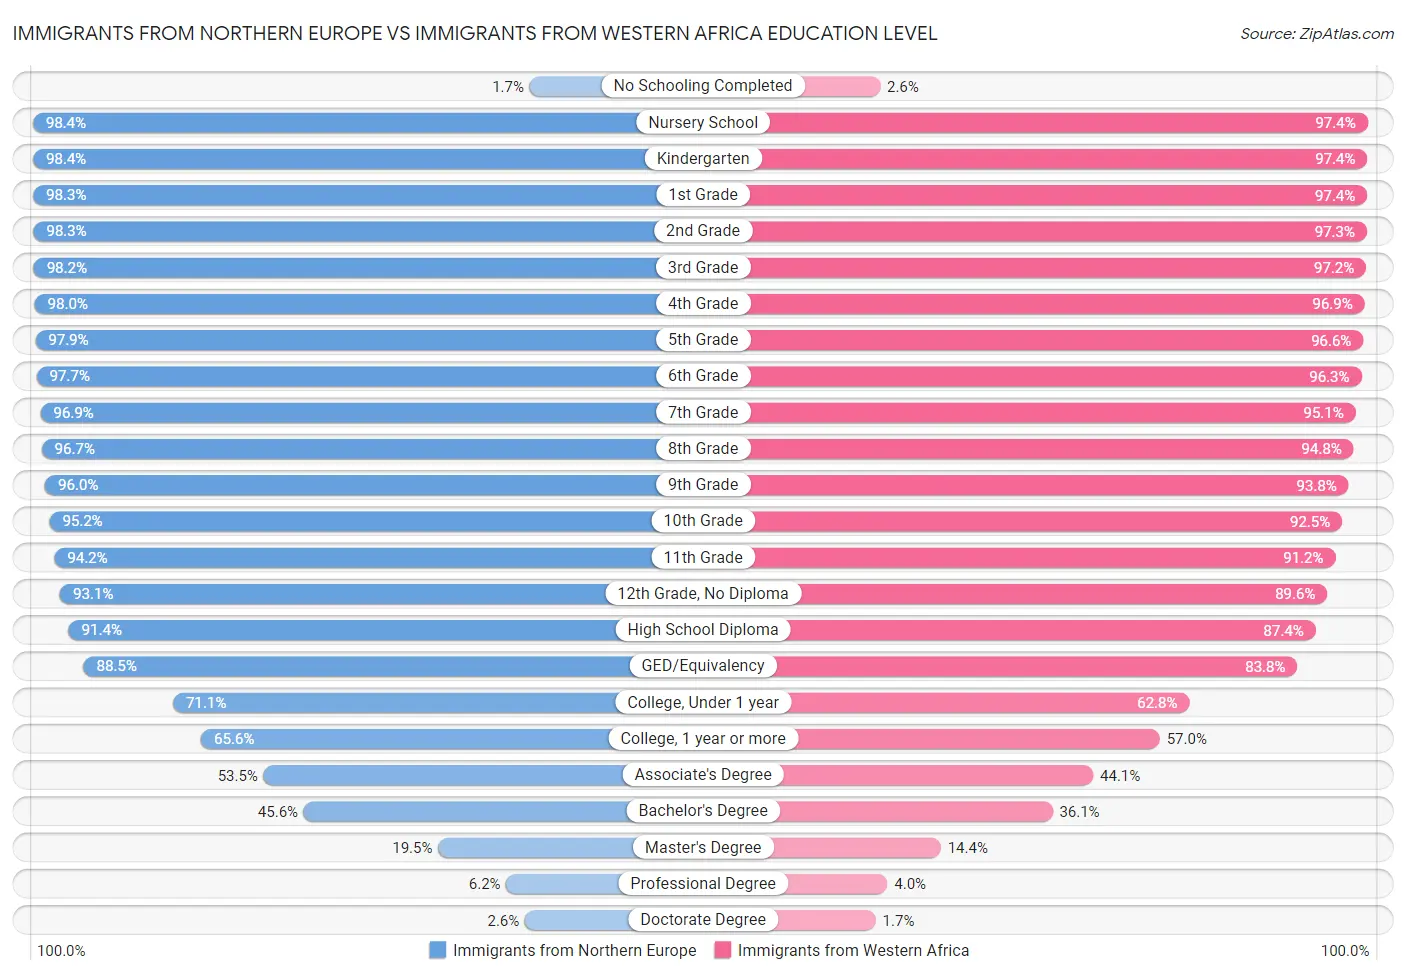 Immigrants from Northern Europe vs Immigrants from Western Africa Education Level